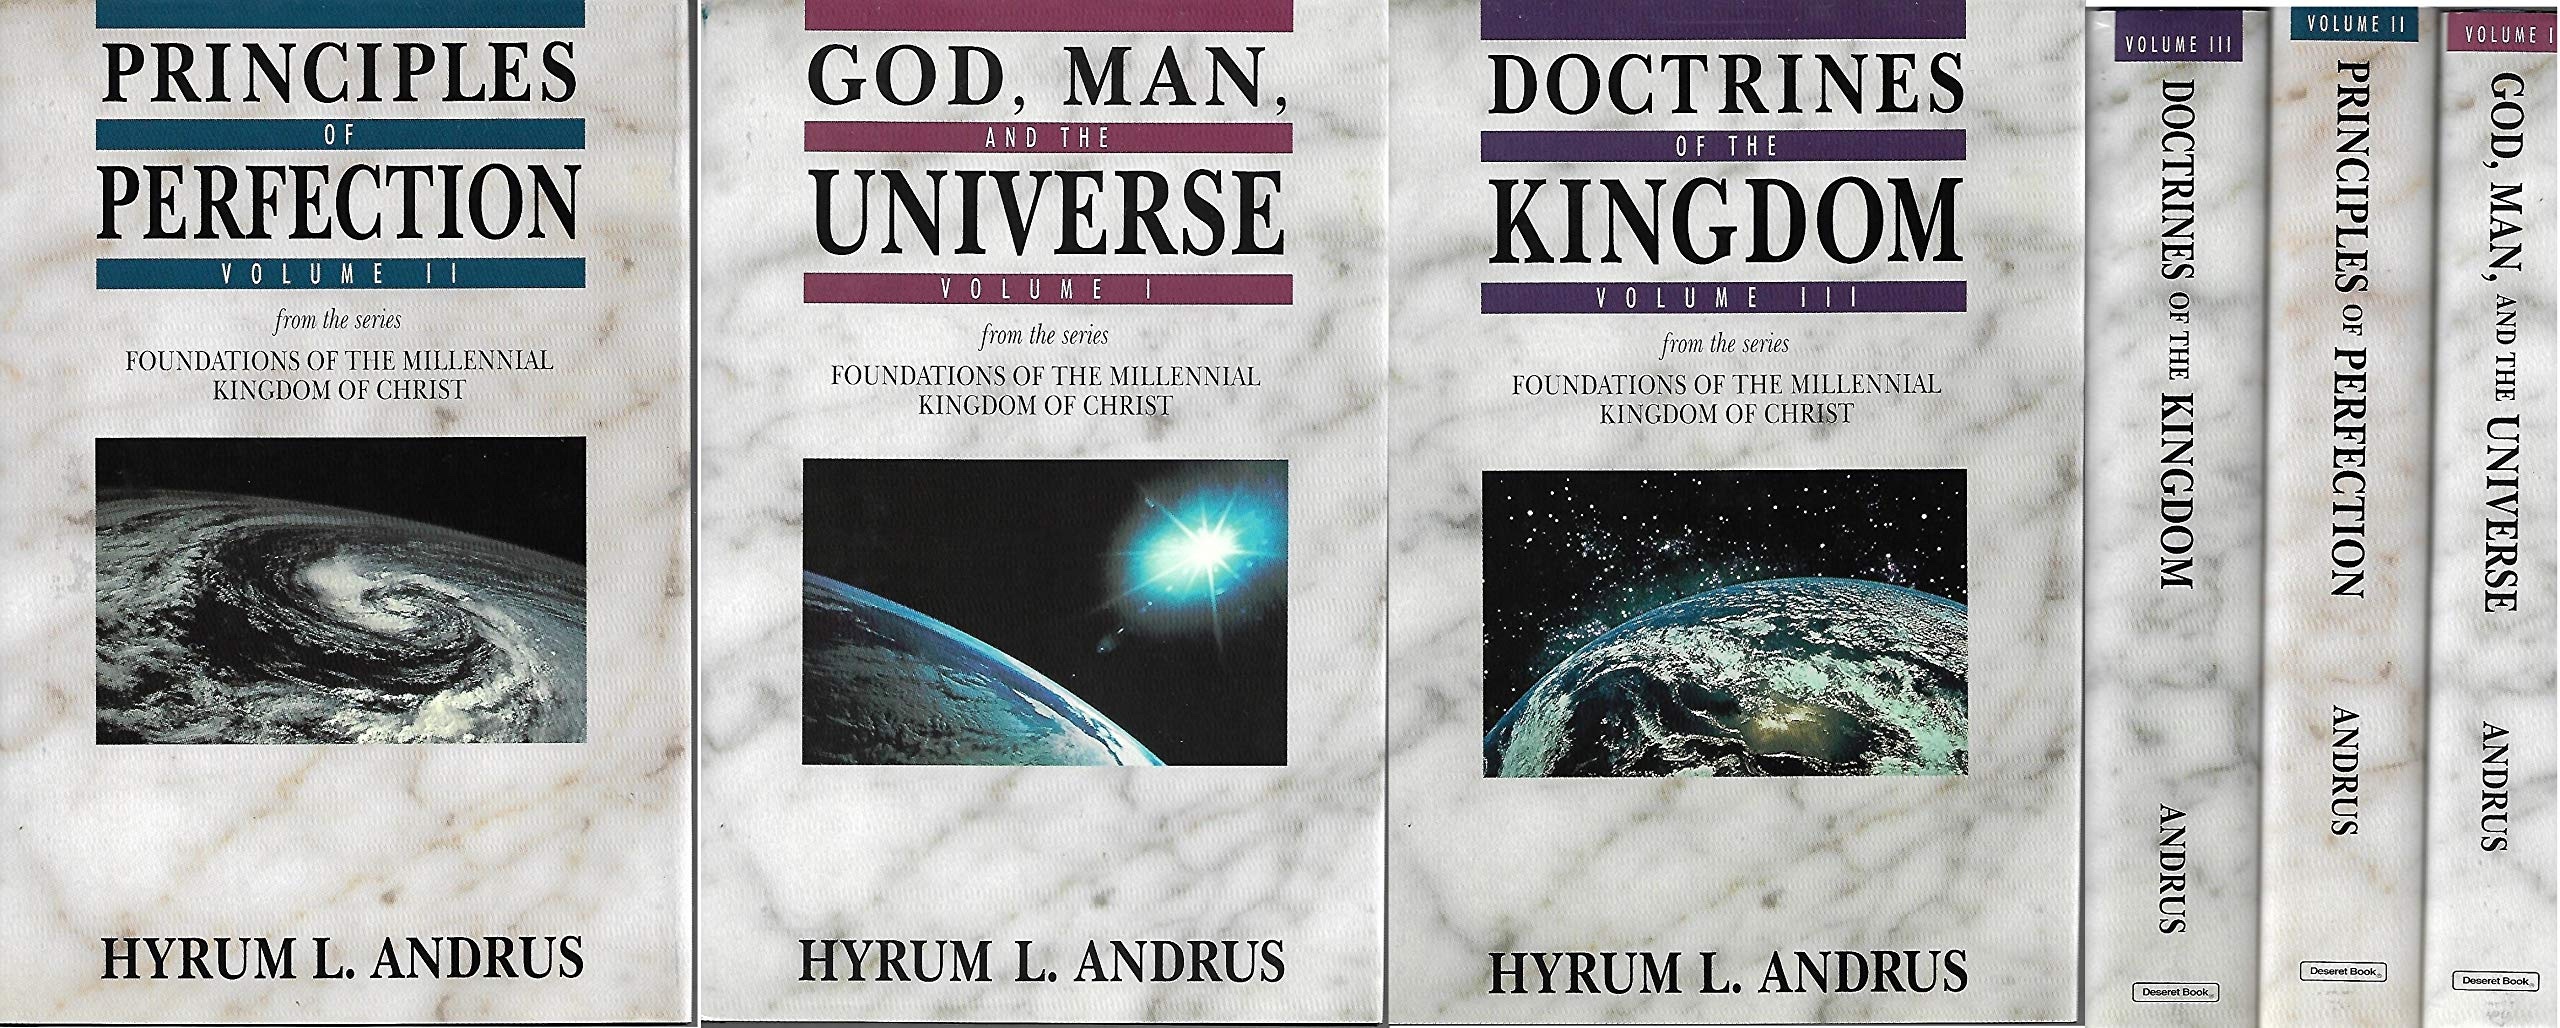 Image for Foundations of the Millennial Kingdom of Christ (God, Man and the Universe, Doctrines of the Kingdom, Principles of Perfection, 3 volume set)